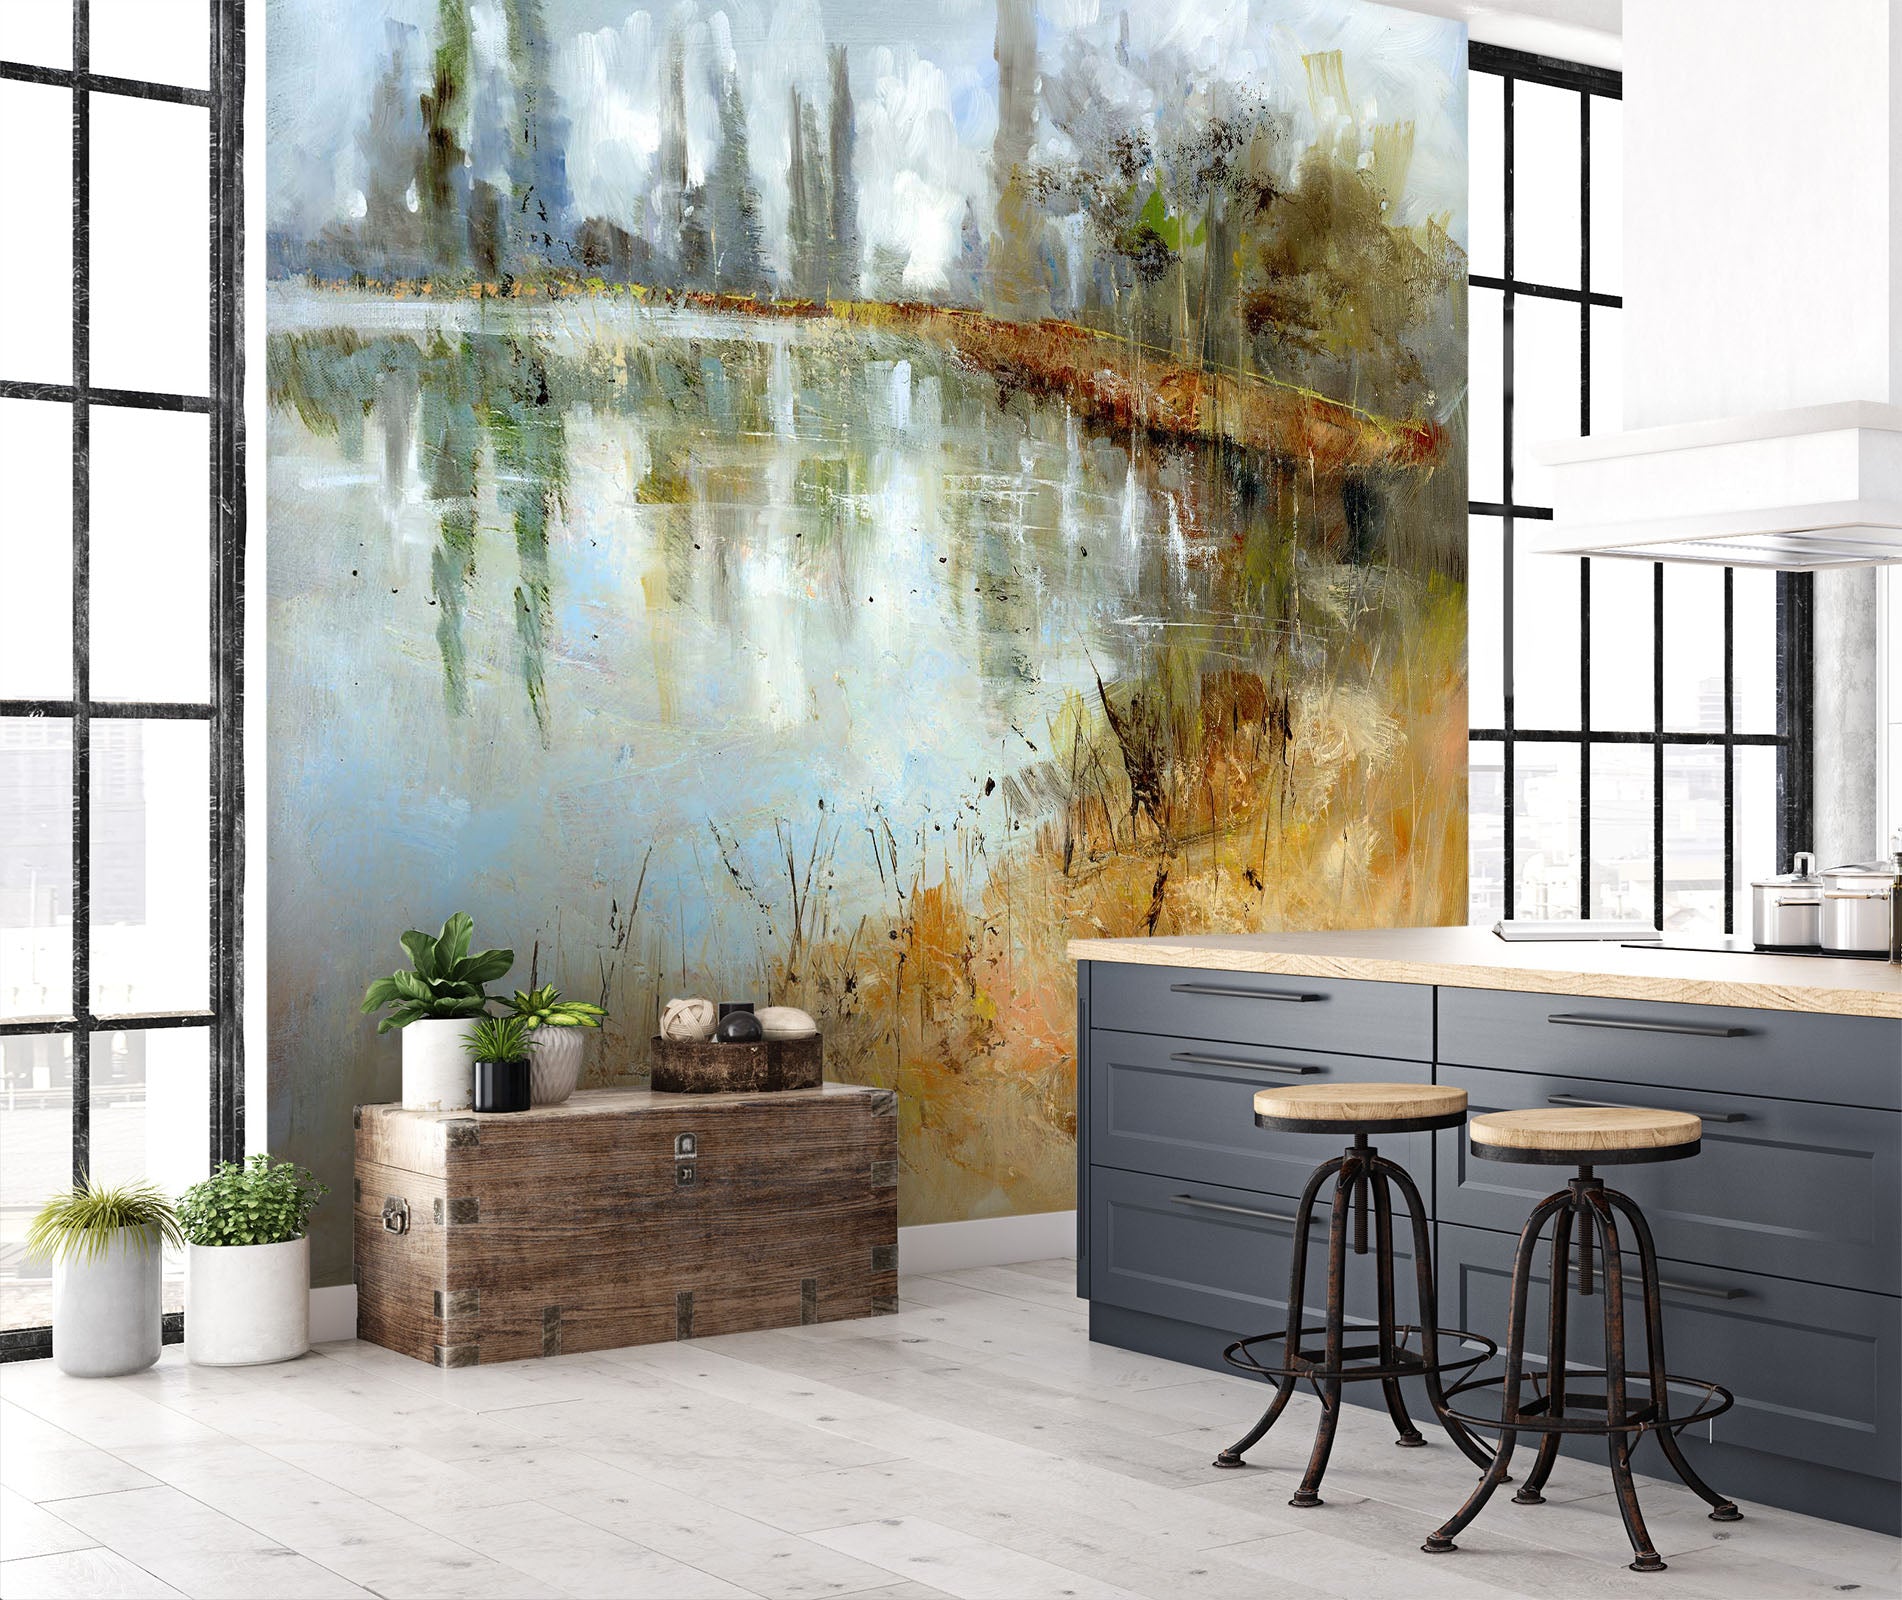 3D Country Road 1412 Anne Farrall Doyle Wall Mural Wall Murals